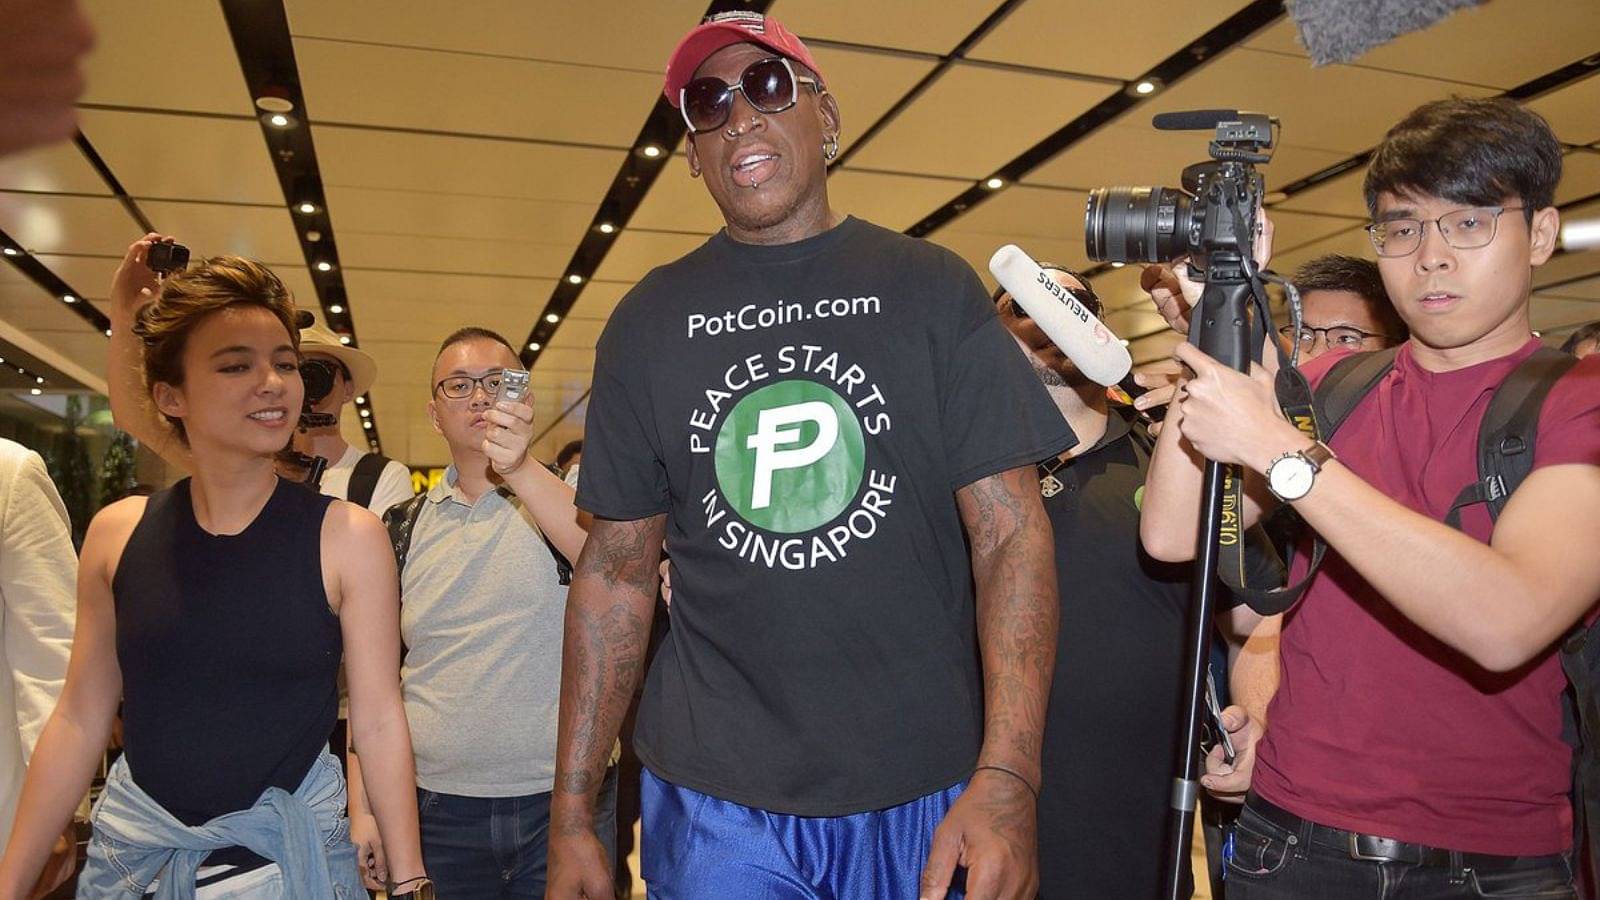 Dennis Rodman Took Help From a $850 Million Industry Based Marijuana Currency ‘Potcoin’ to Fund North Korea Trip